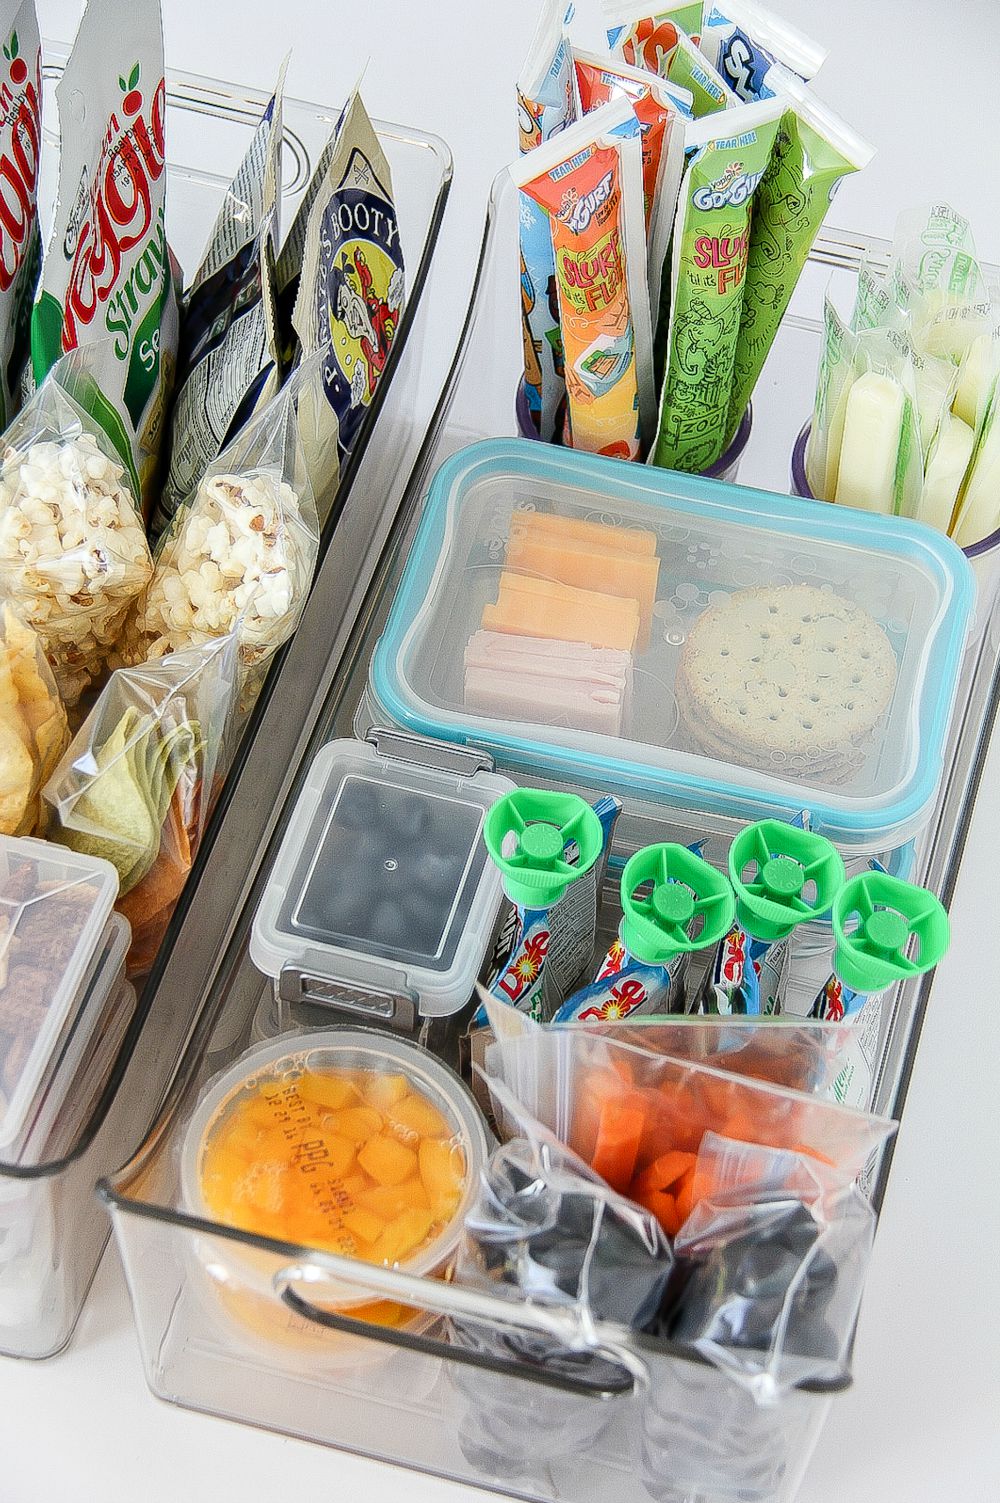 gluten free snacks in refrigerator and pantry trays for kids